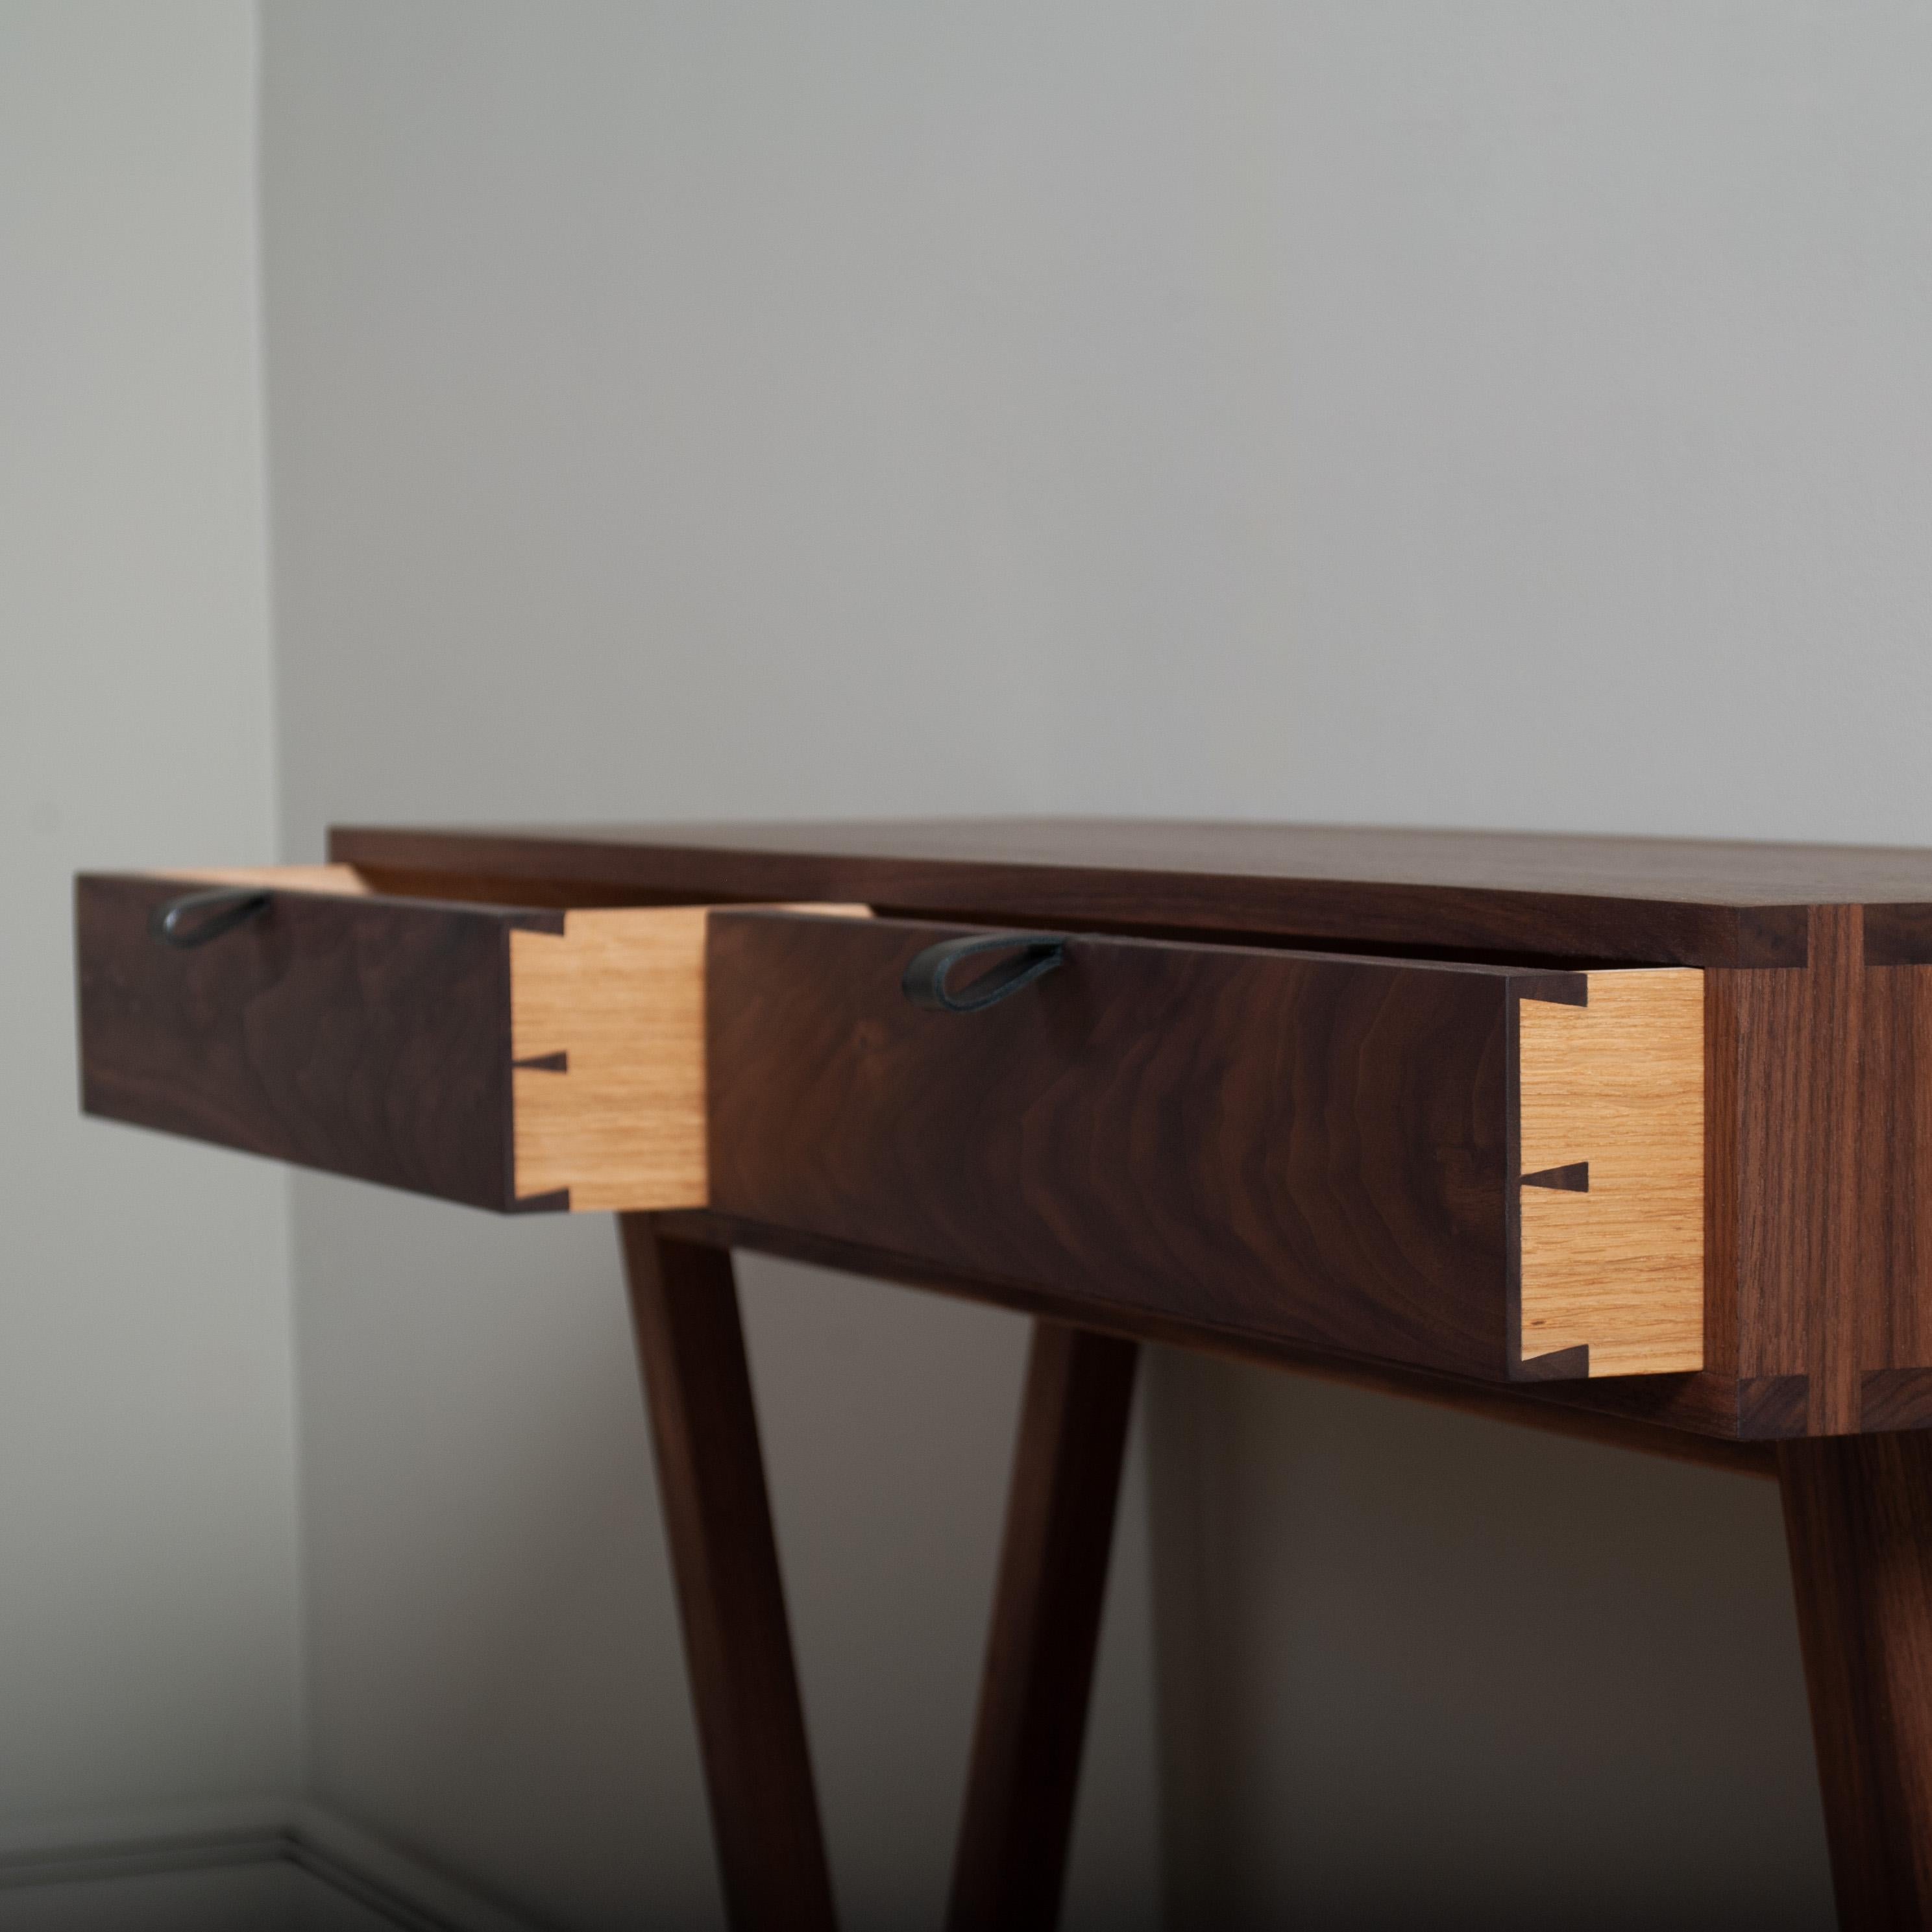 Modernist American black walnut console table designed and produced in England using traditional furniture making techniques. Completely handcrafted from the finest American black walnut. Hand dovetailed joints to the main console drawer box and all